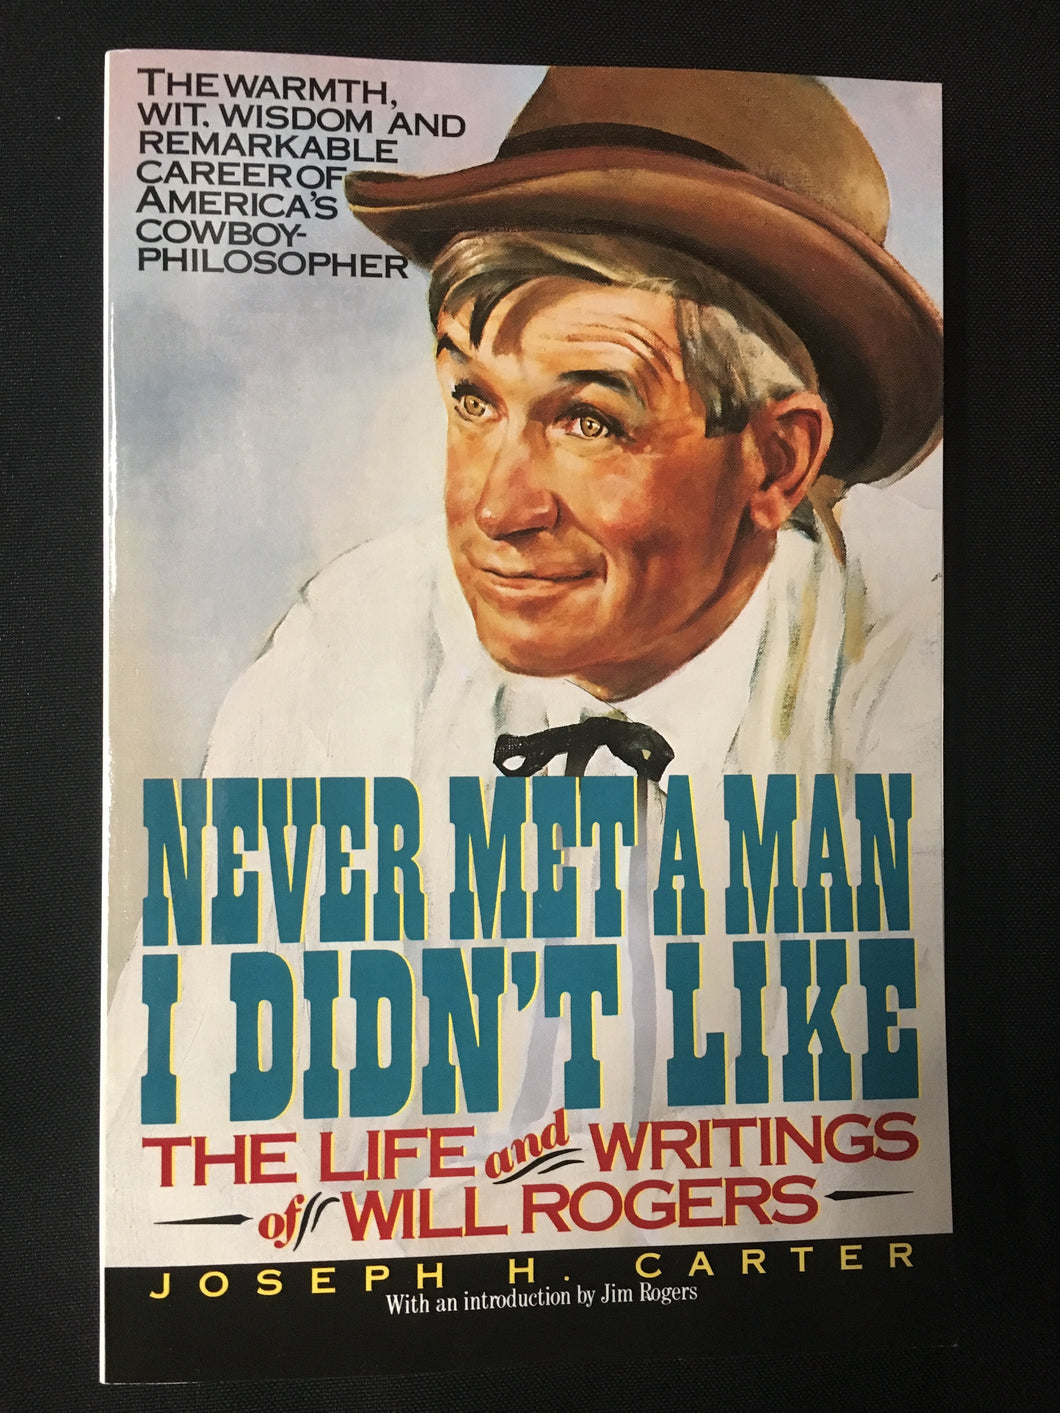 Never Met A Man I Didn't Like by Joseph H. Carter